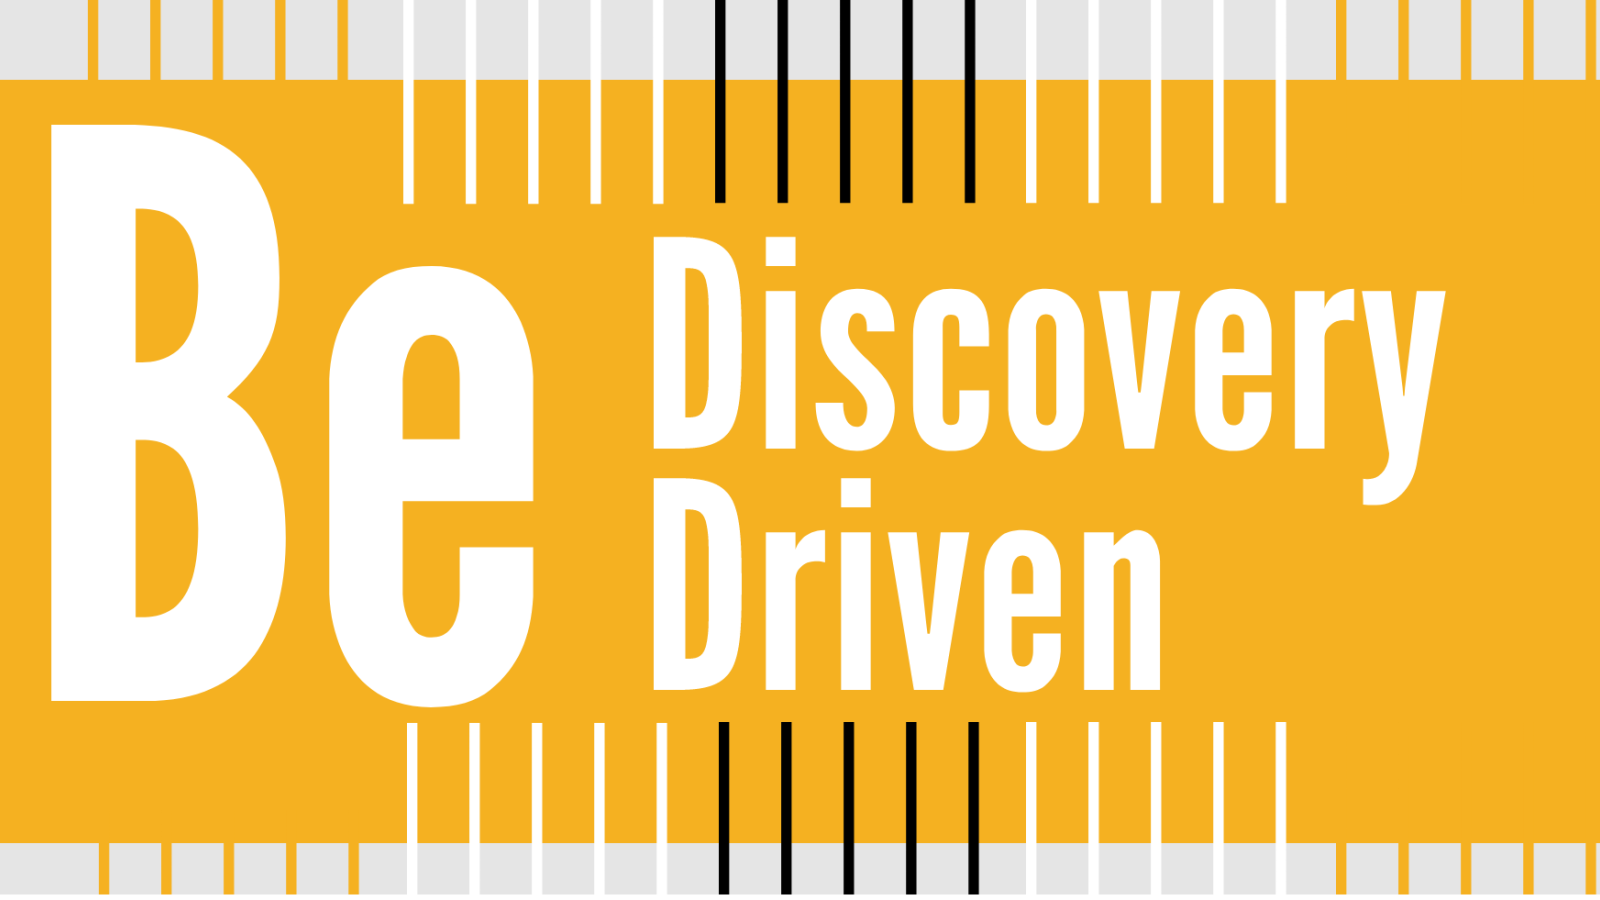 Be Discovery Driven